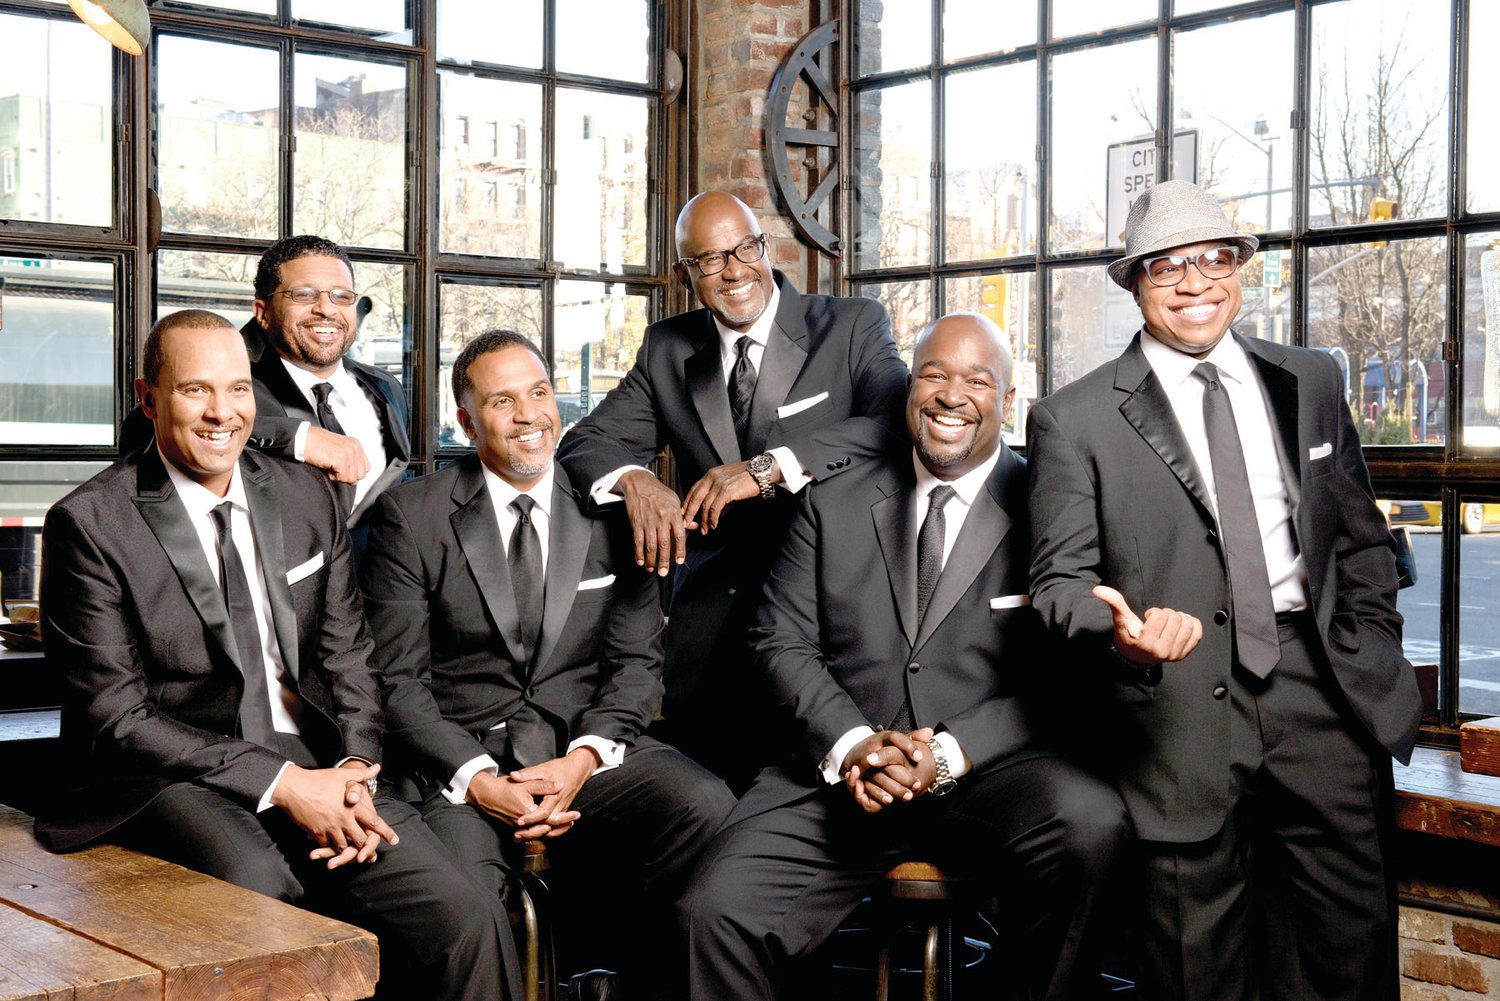 Take 6 opens the BRT outdoor summer music series June 11 and 12, at the new amphitheater in Bristol Township.